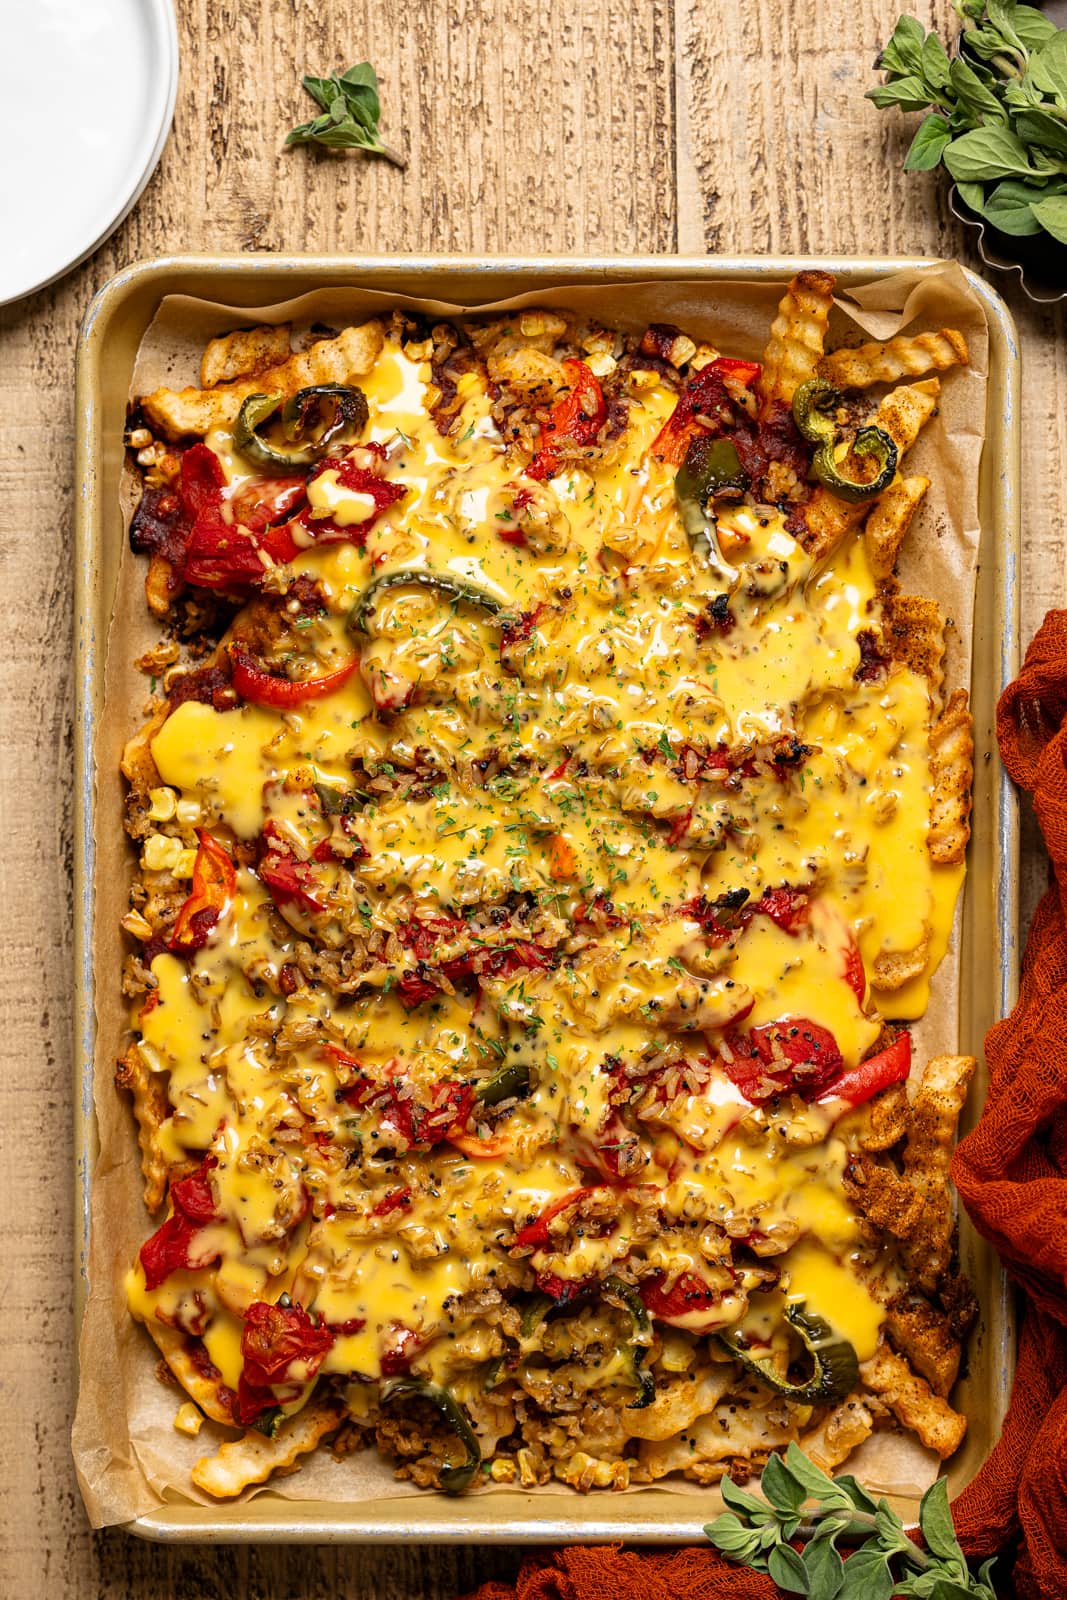 Baked loaded fries topped with melted dairy-free nacho cheese.